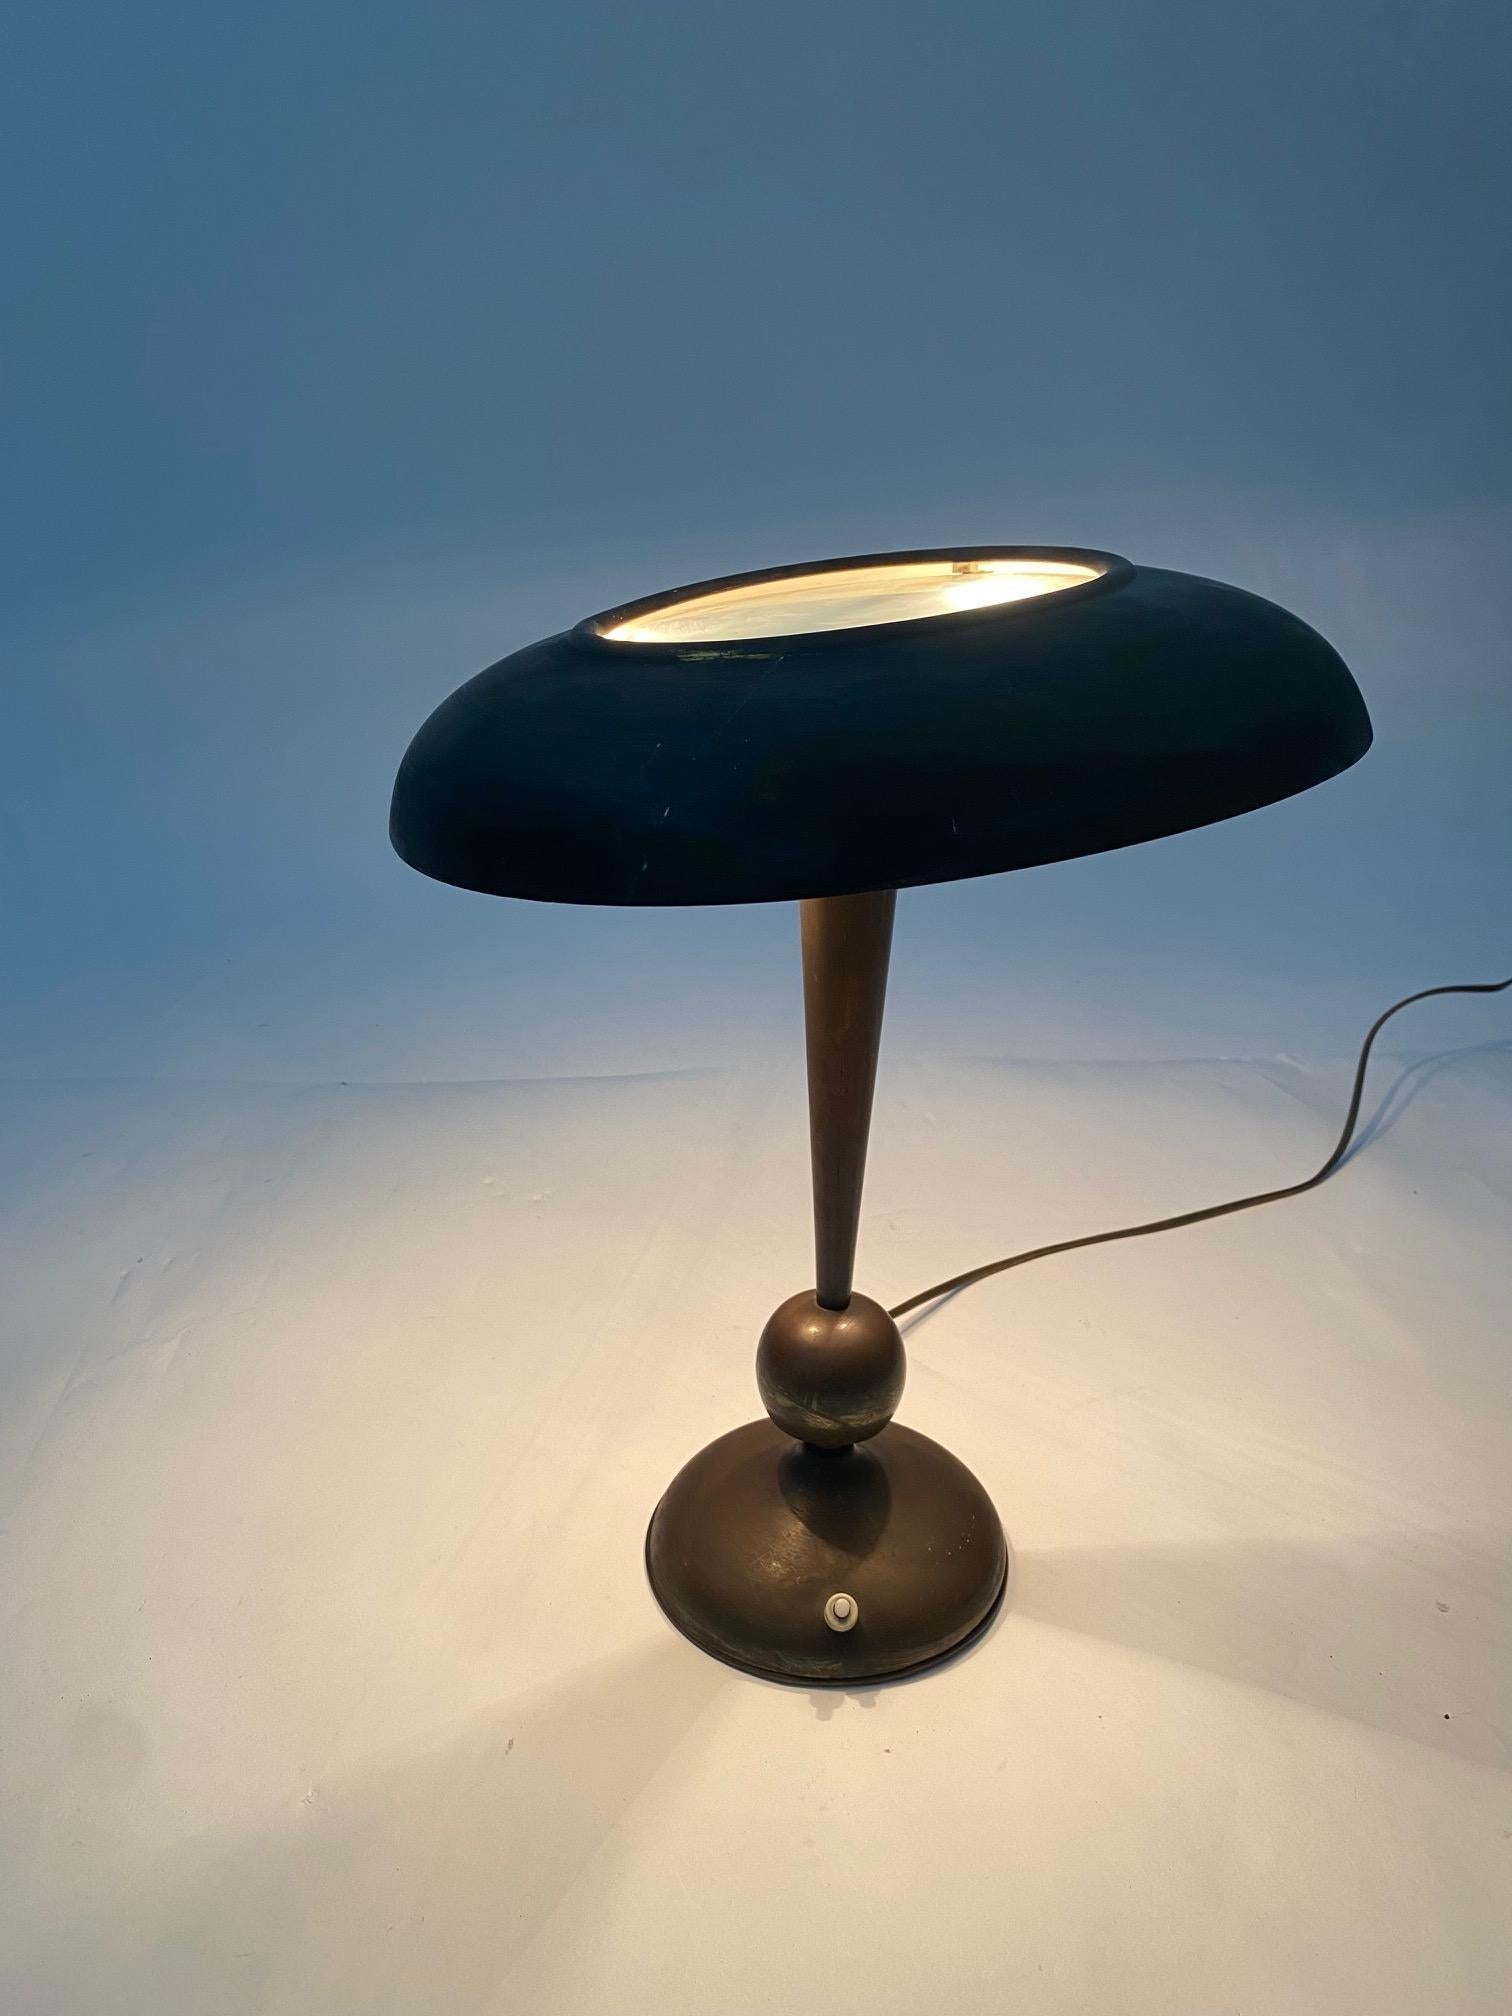 Rare and refined table lamp designed by Oscar Torlasco for the 